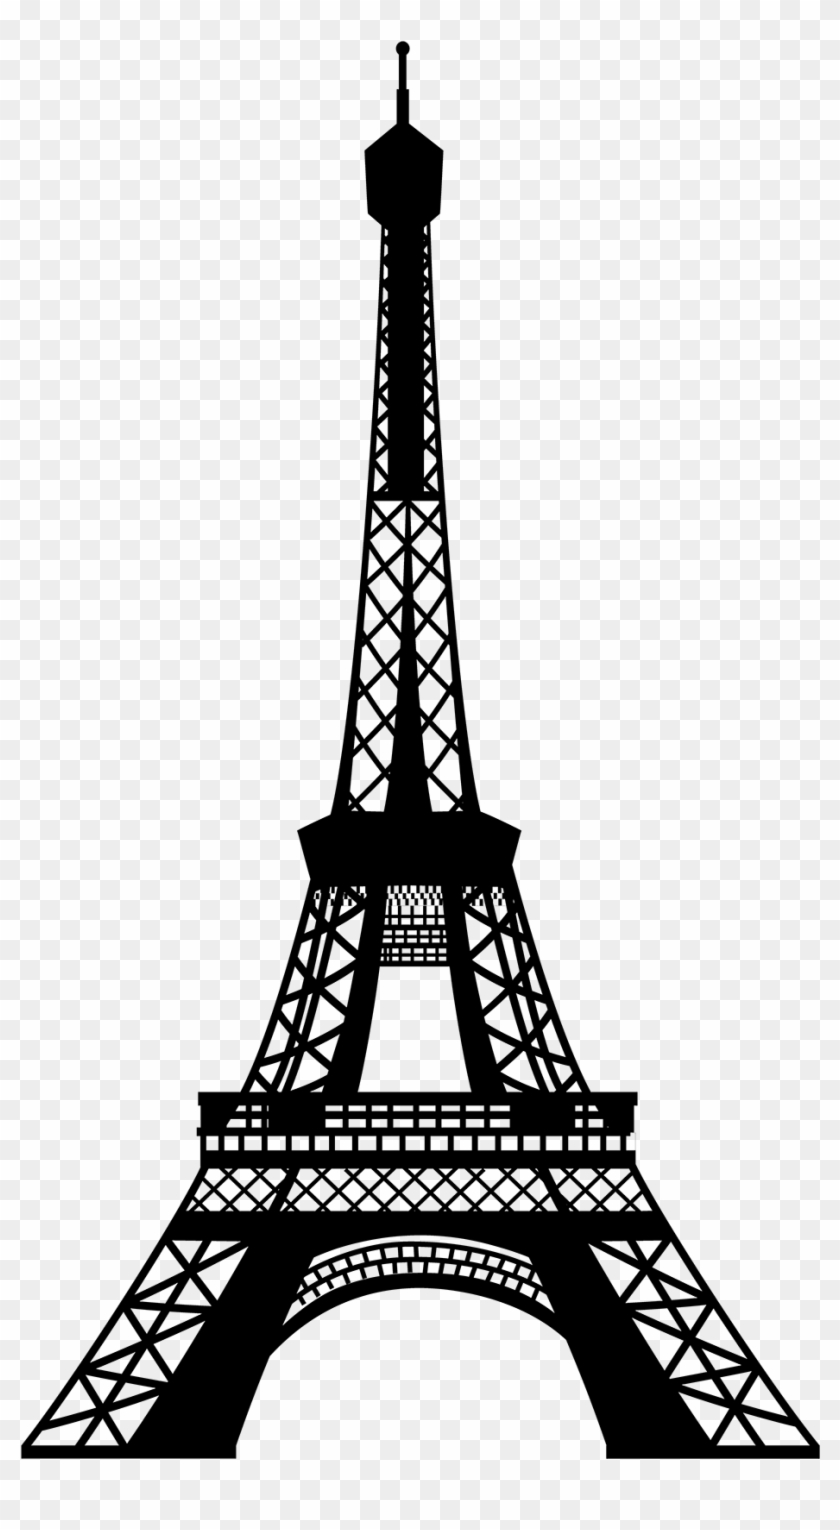 Black And White Eiffel Tower Sketch At Paintingvalley Com